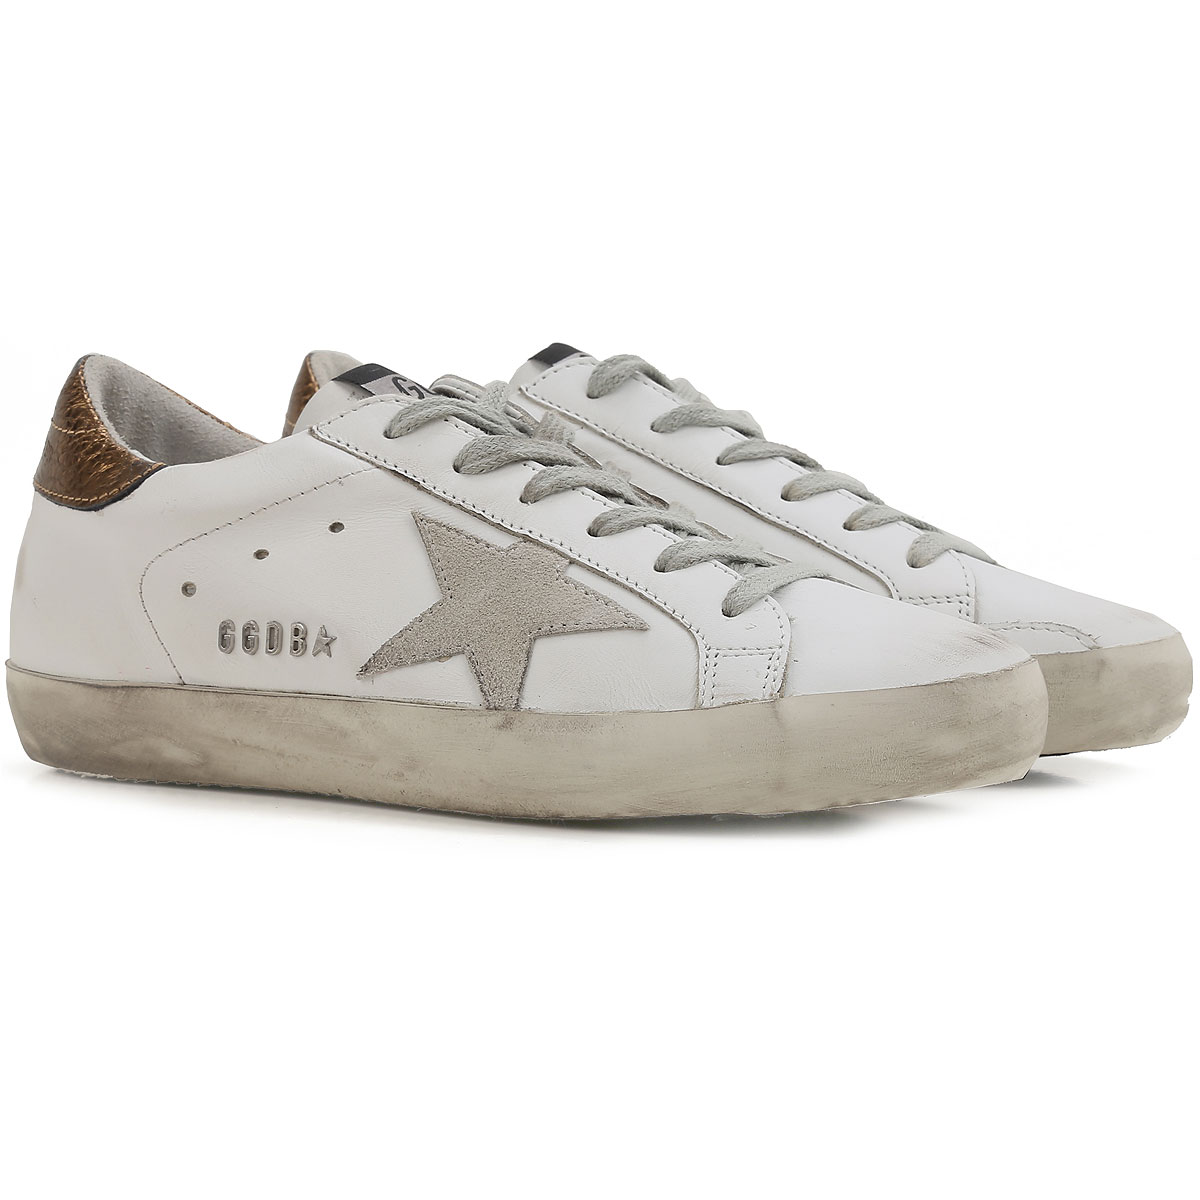 Womens Shoes Golden Goose, Style code: g31ws590-c73-